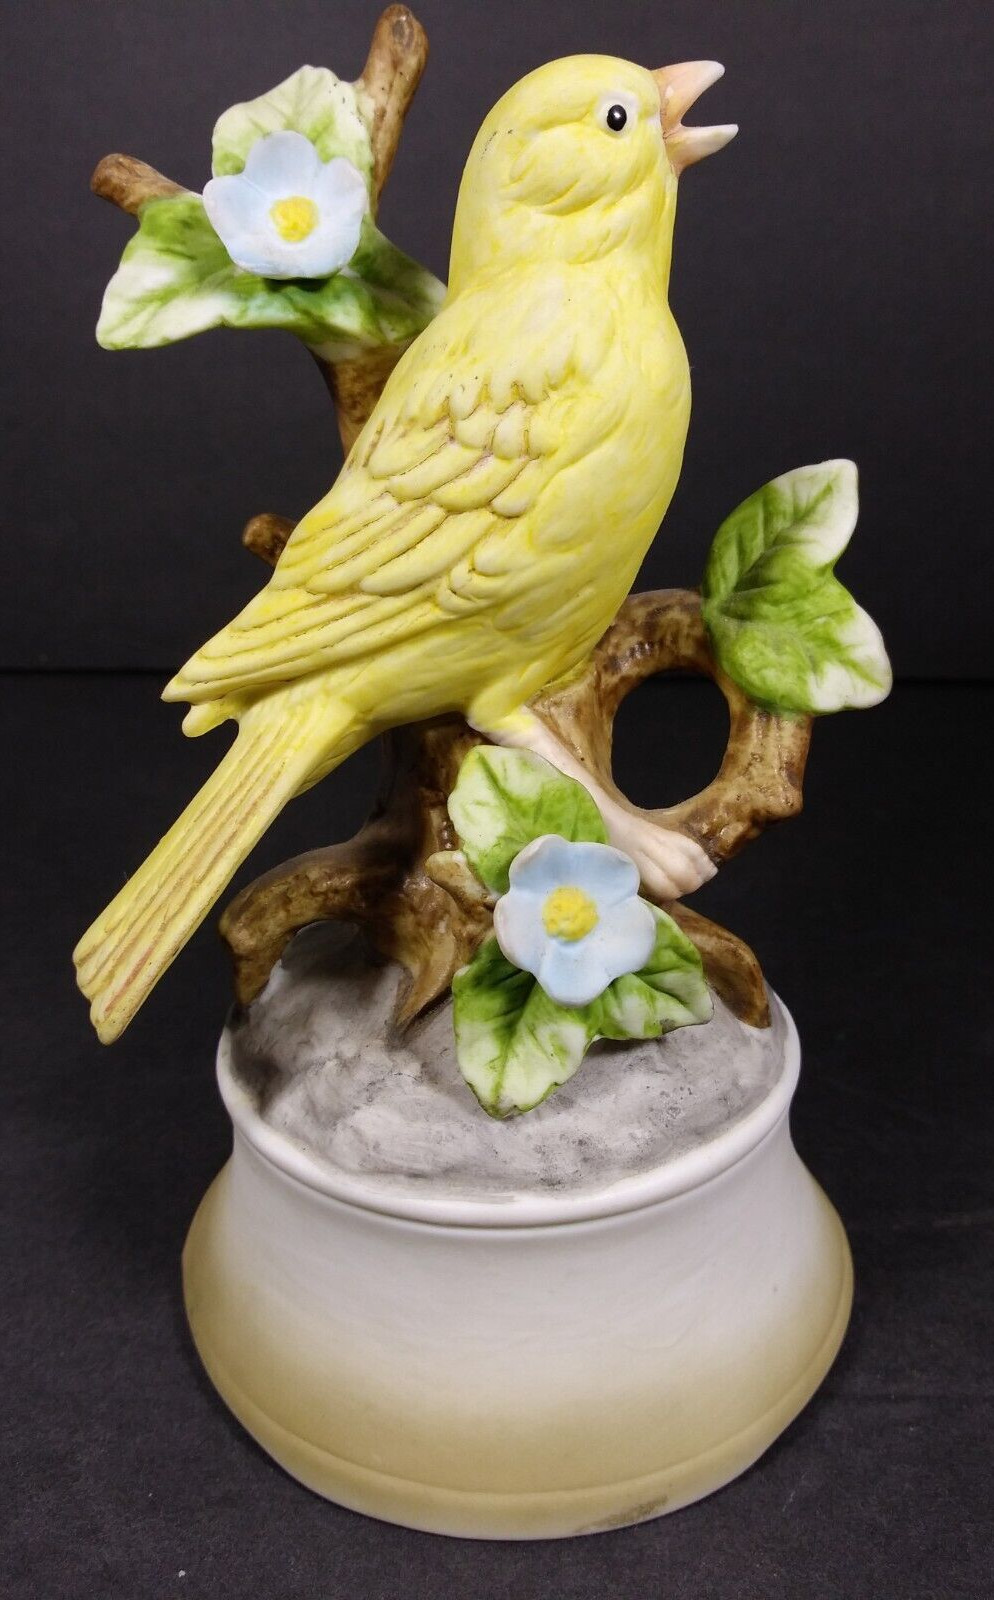 Vintage Shafford Porcelain Canary Bird Flowers Music Box Made in Japan EUC Works